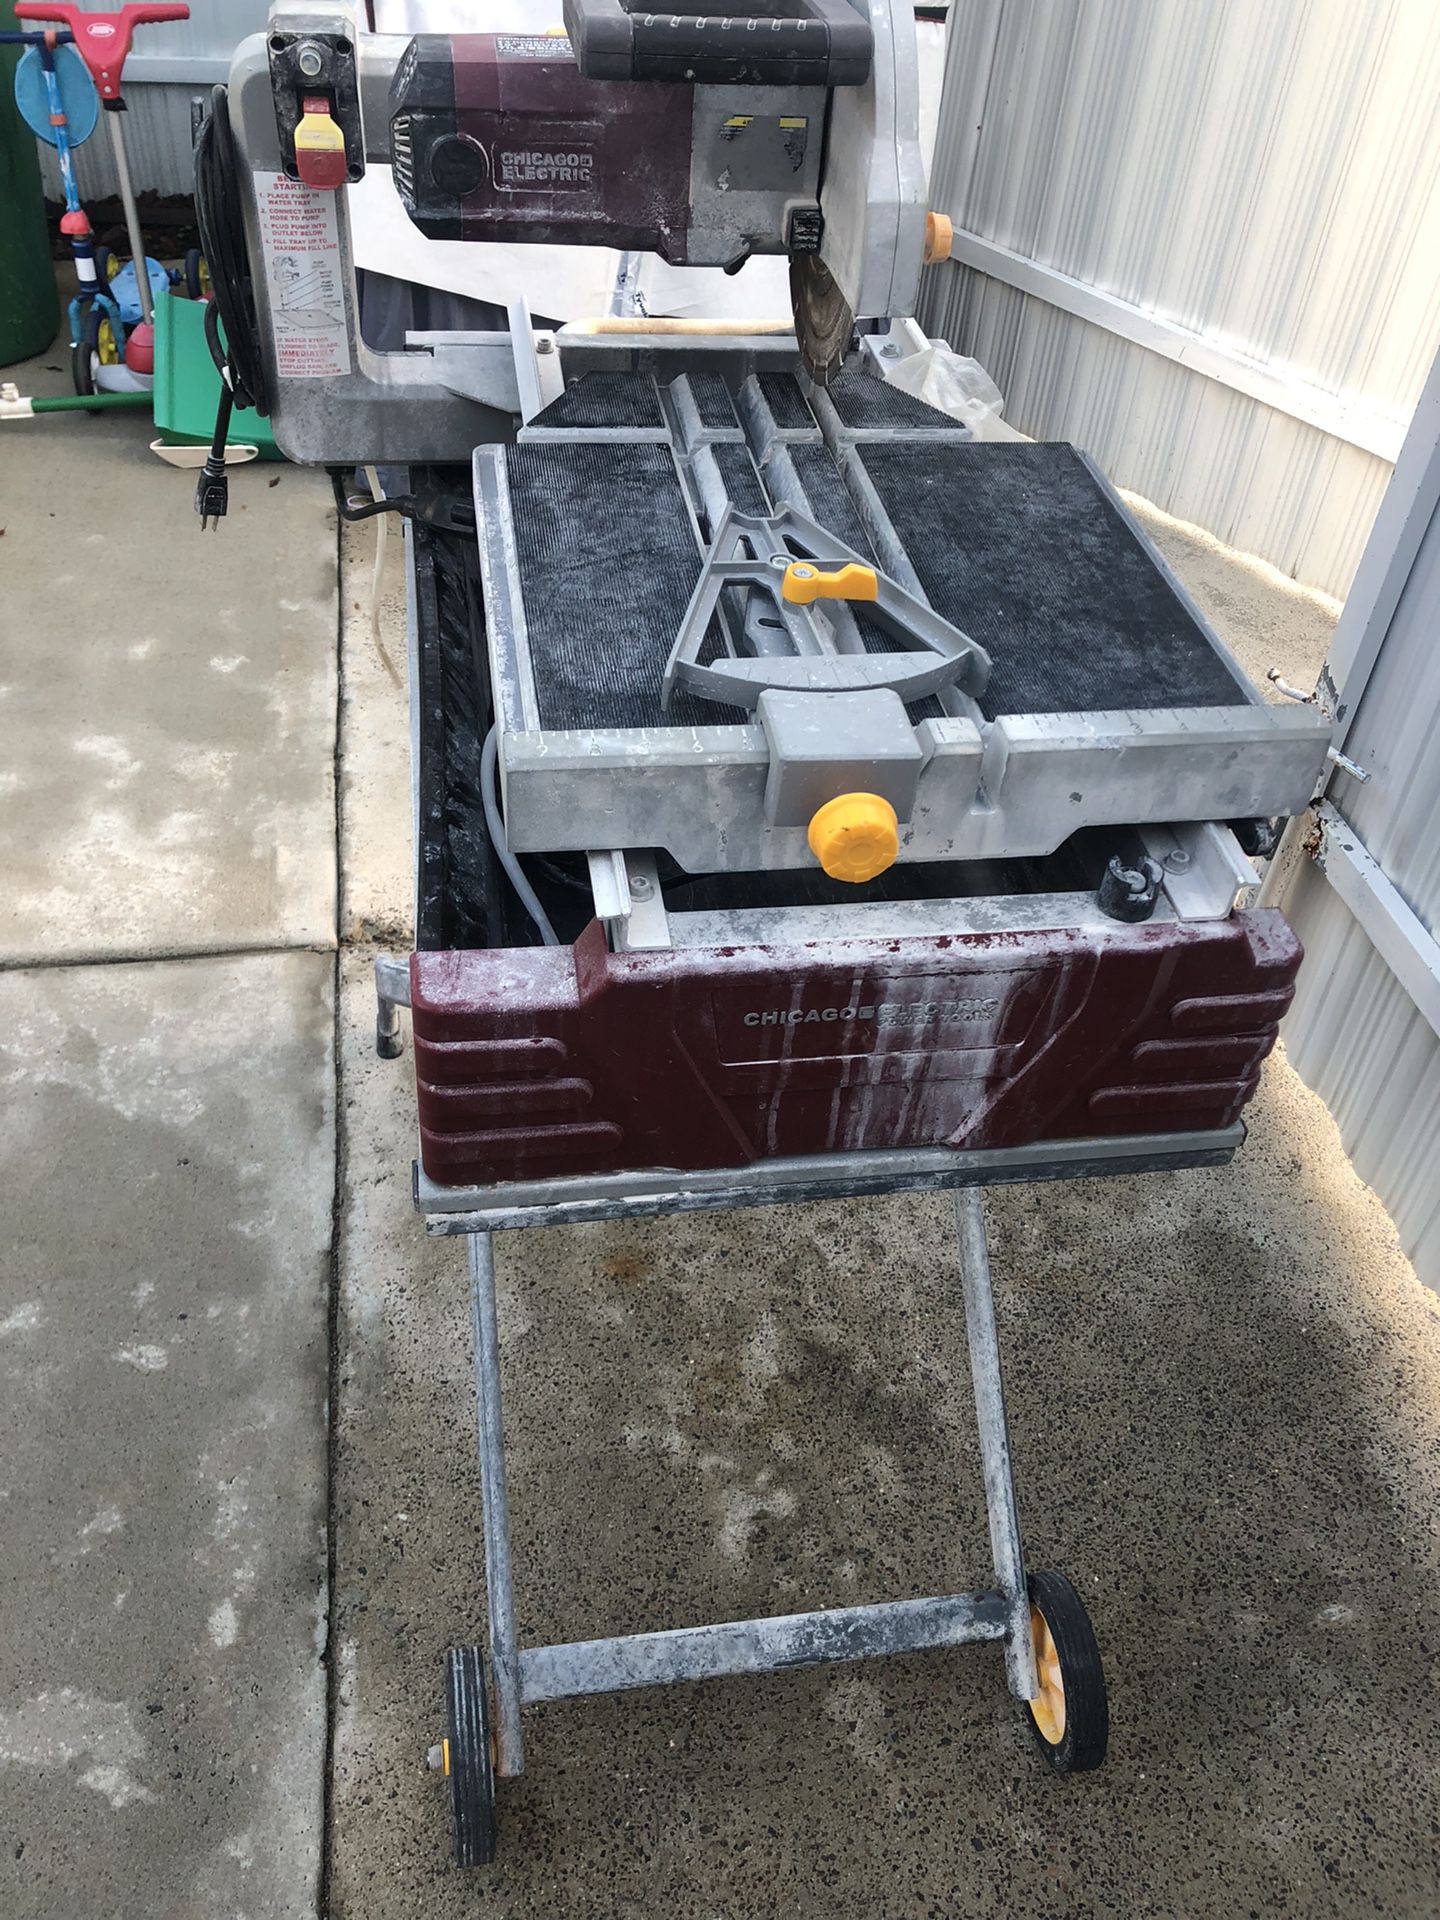 10 Inch Tile Saw$225 Firm